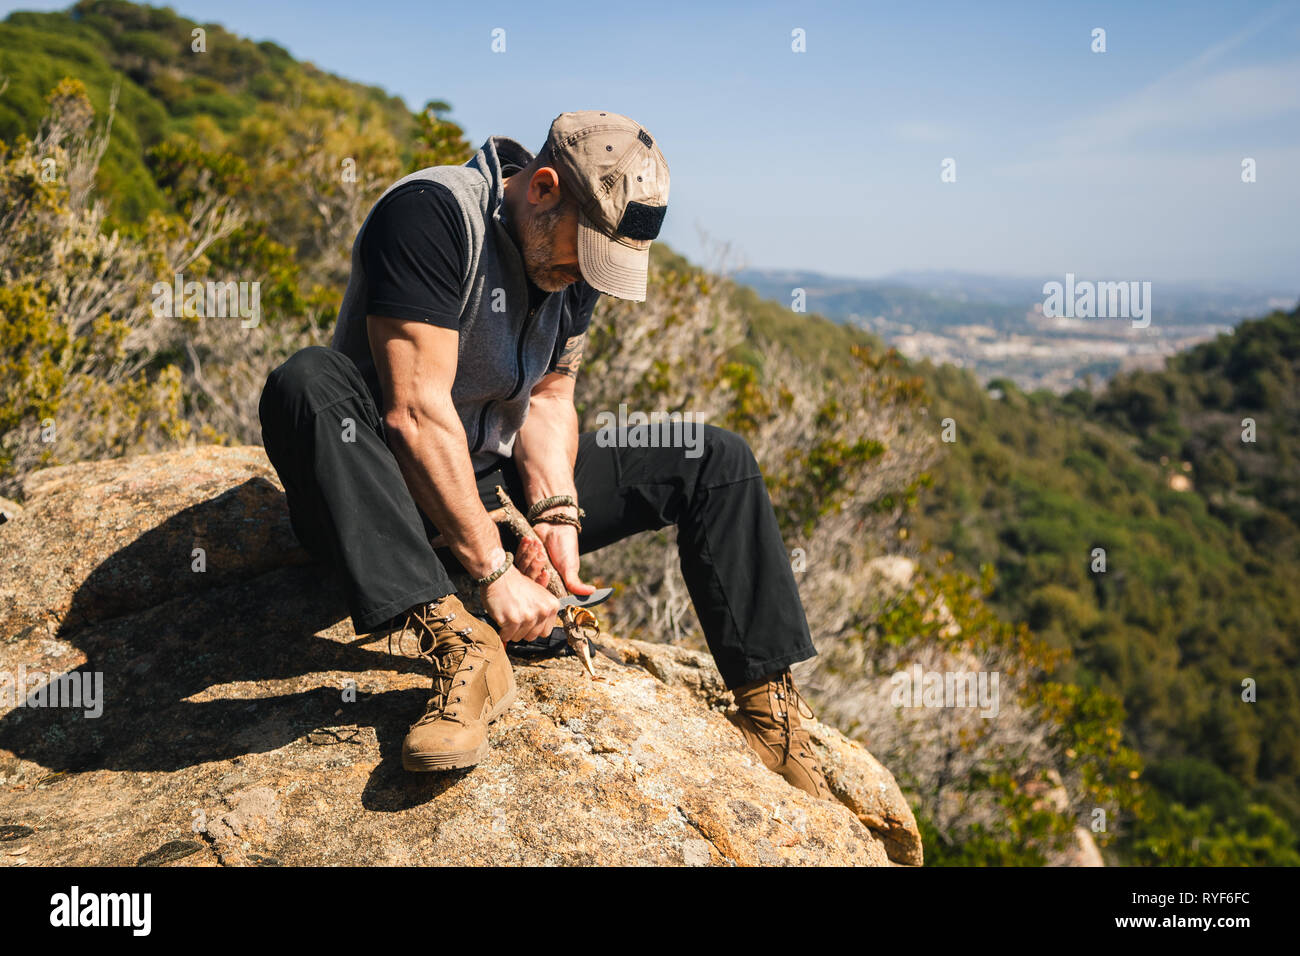 Man sitting on a rock in the nature with great view carving a stock of a tree with a knife Stock Photo